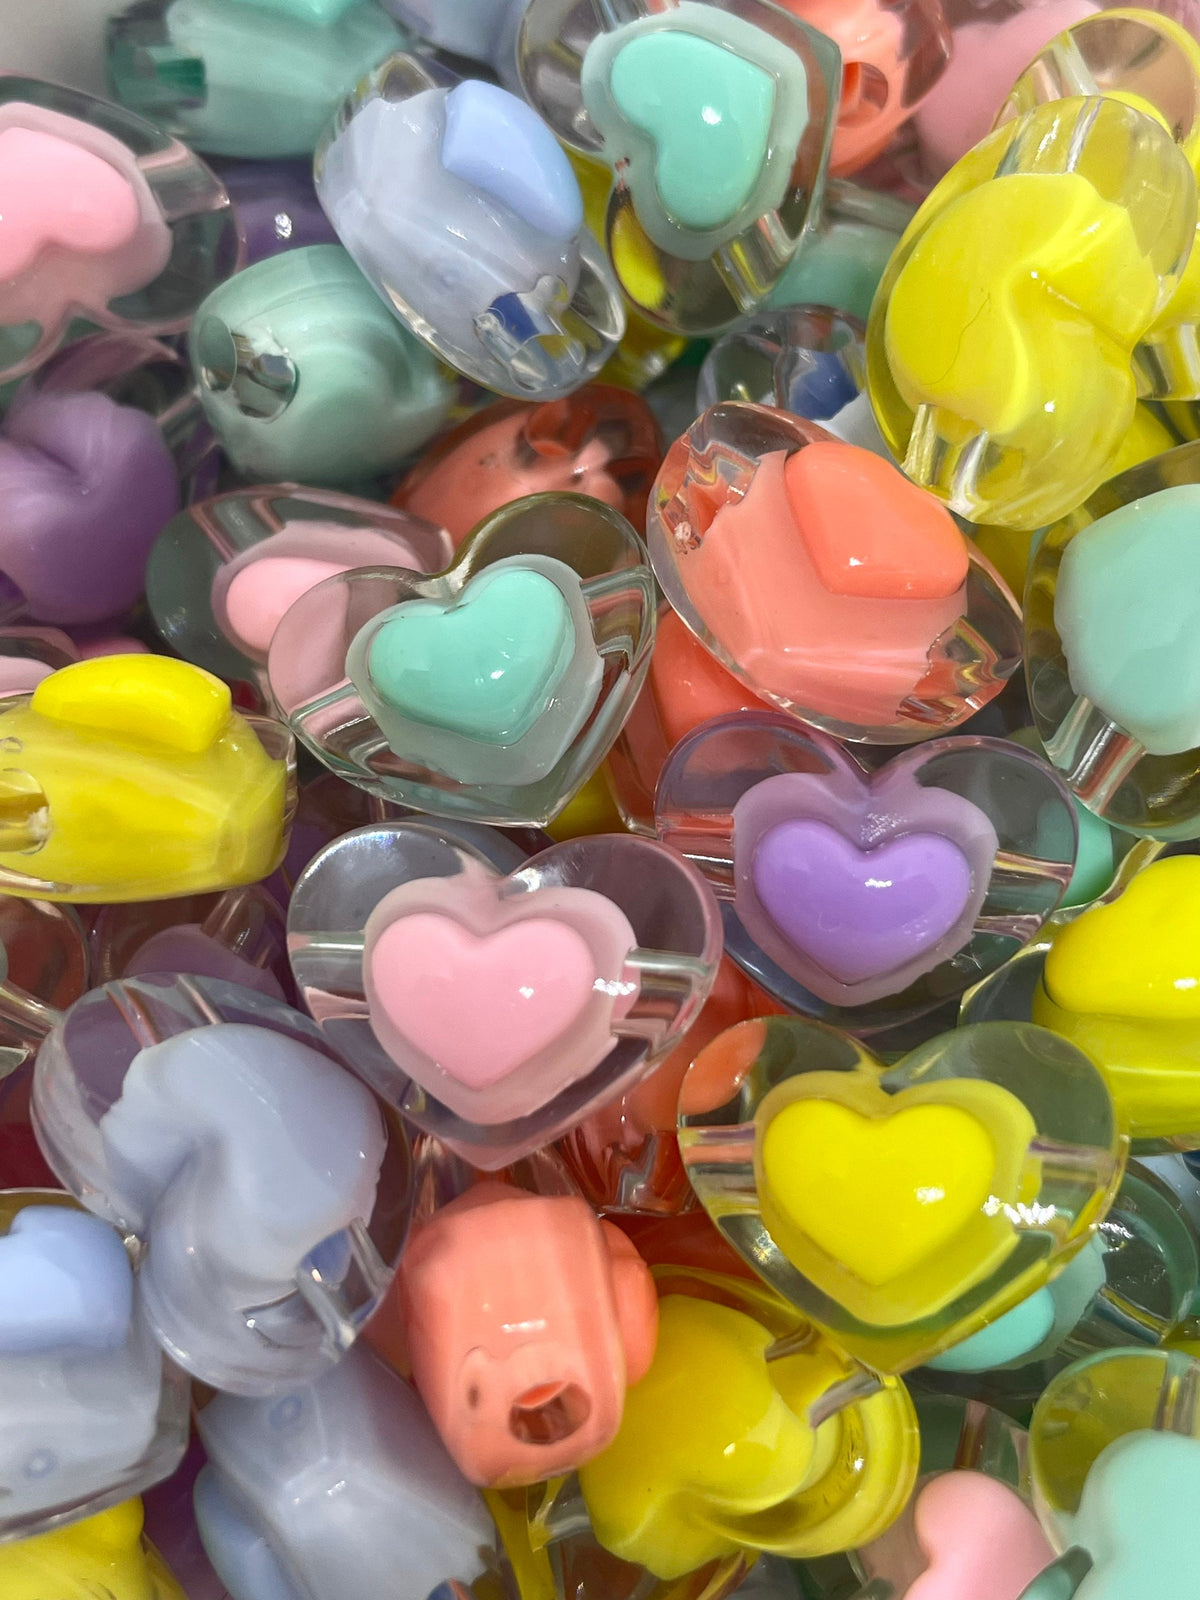 17mm Pastel Candy Heart Acrylic Beads - 5 Colors❤️ – RainbowShop for Craft